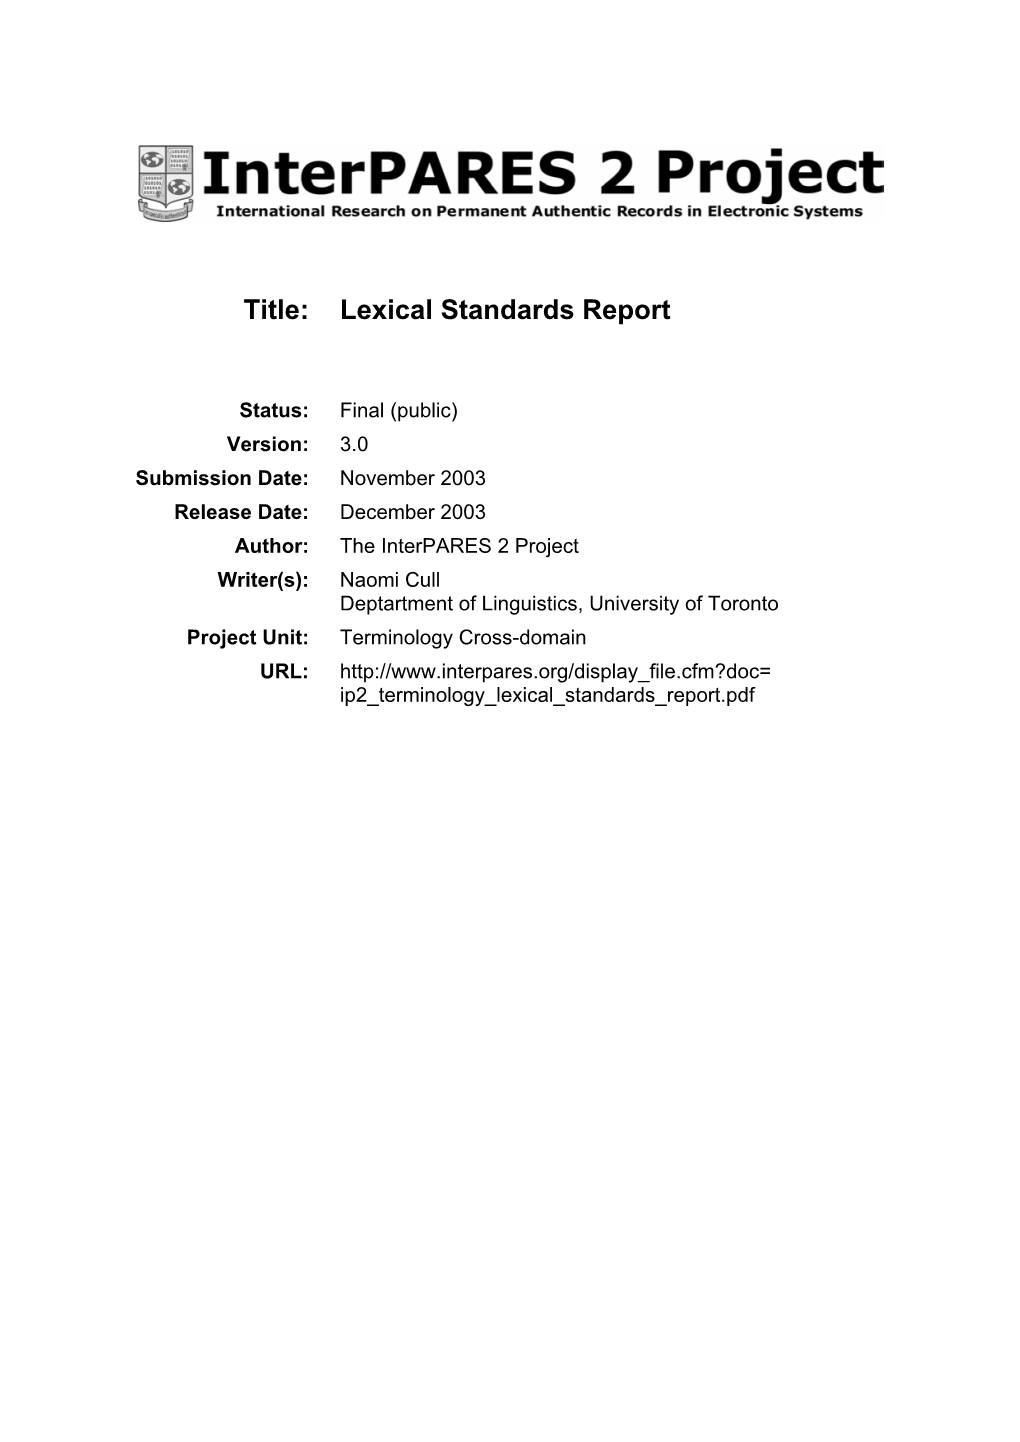 Lexical Standards Report